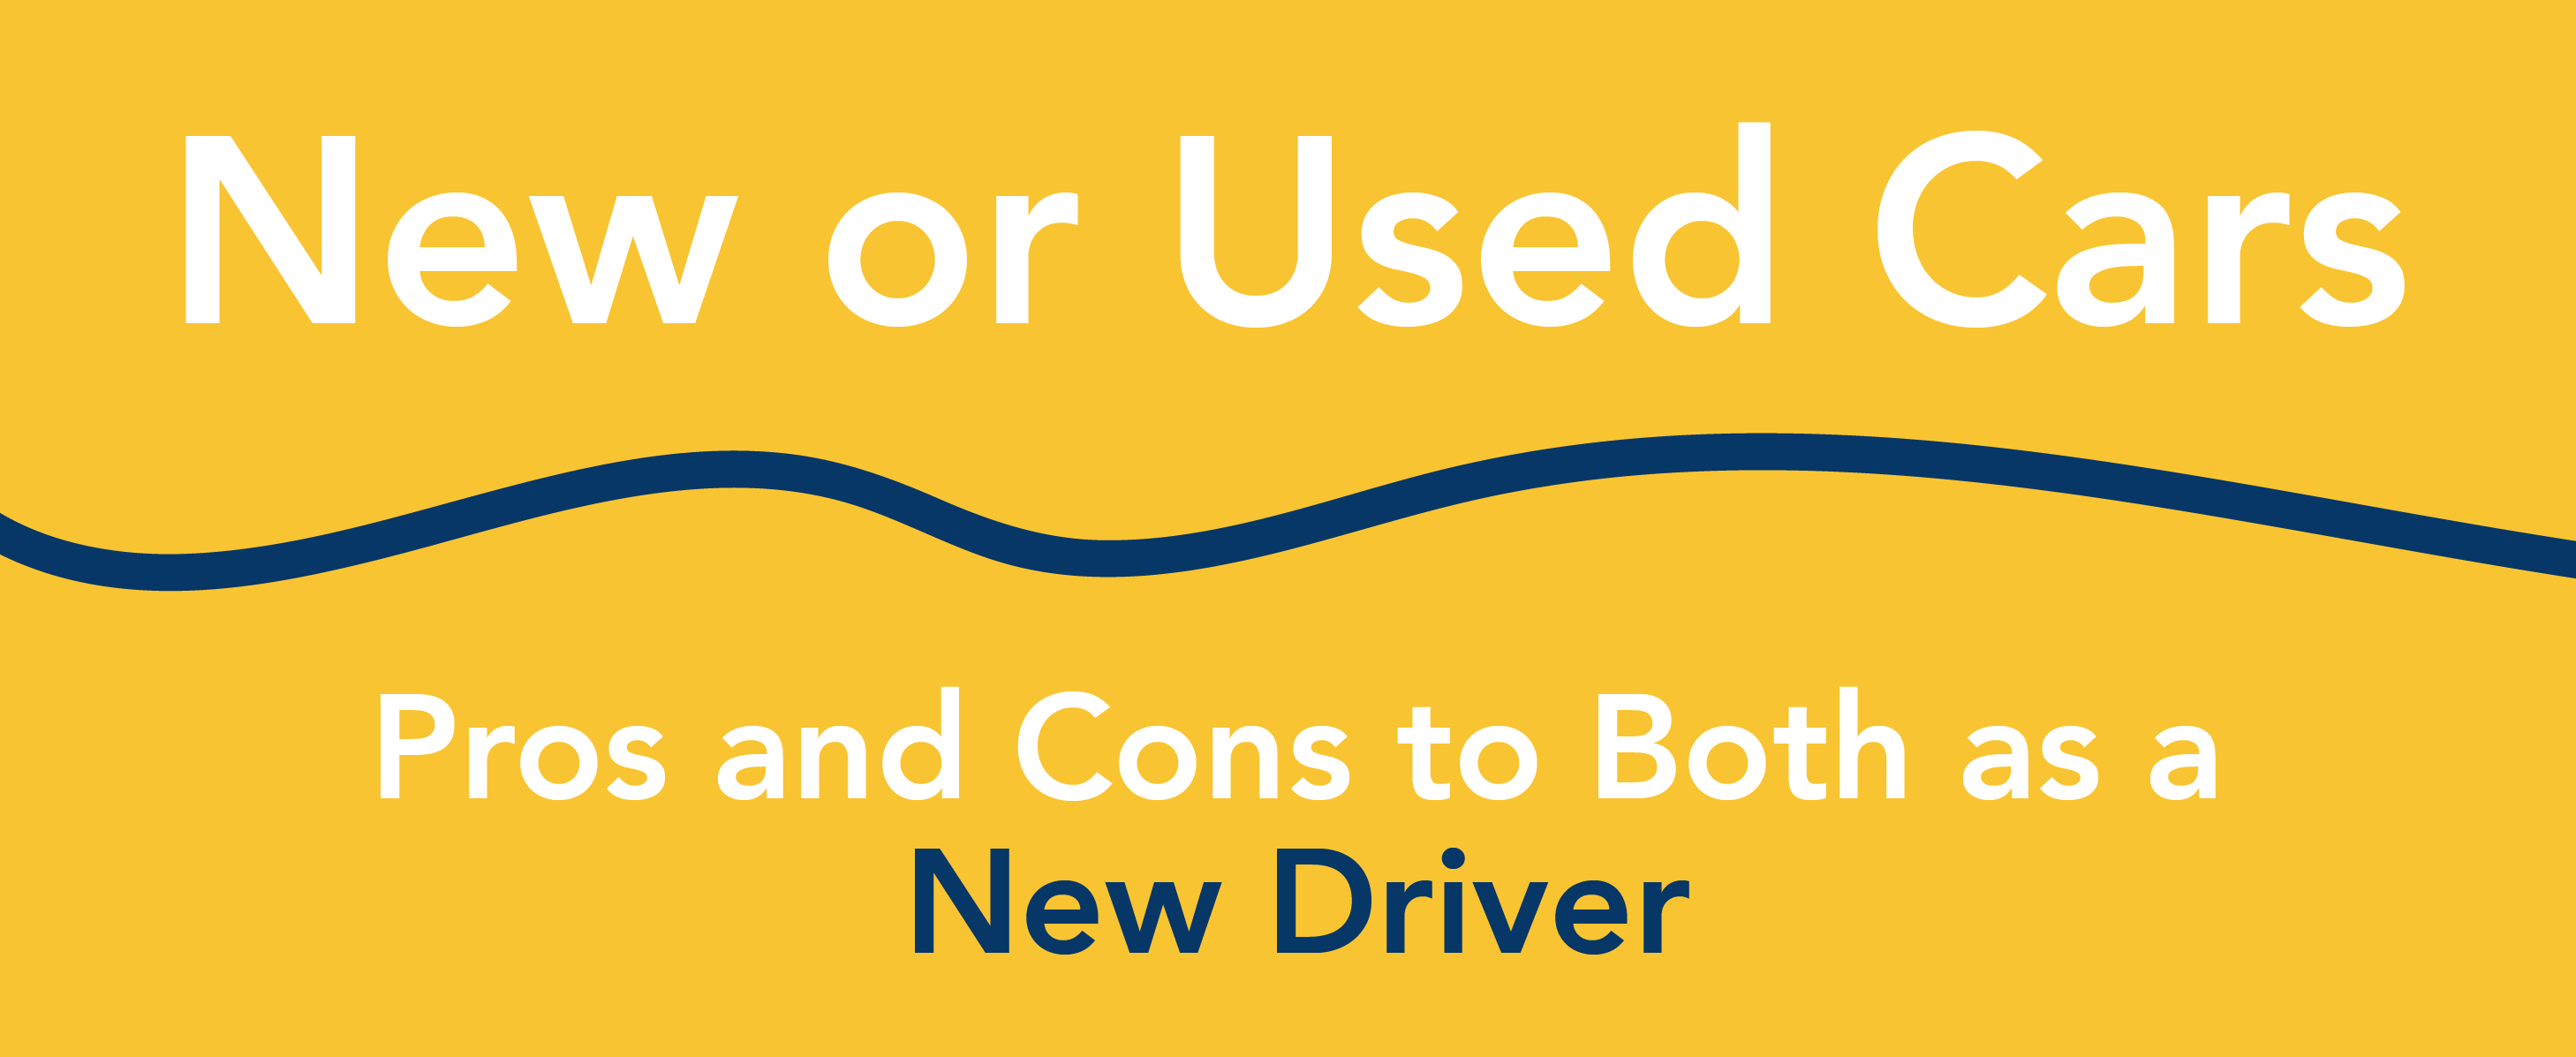 New or used cars: pros and cons to both as a new driver.